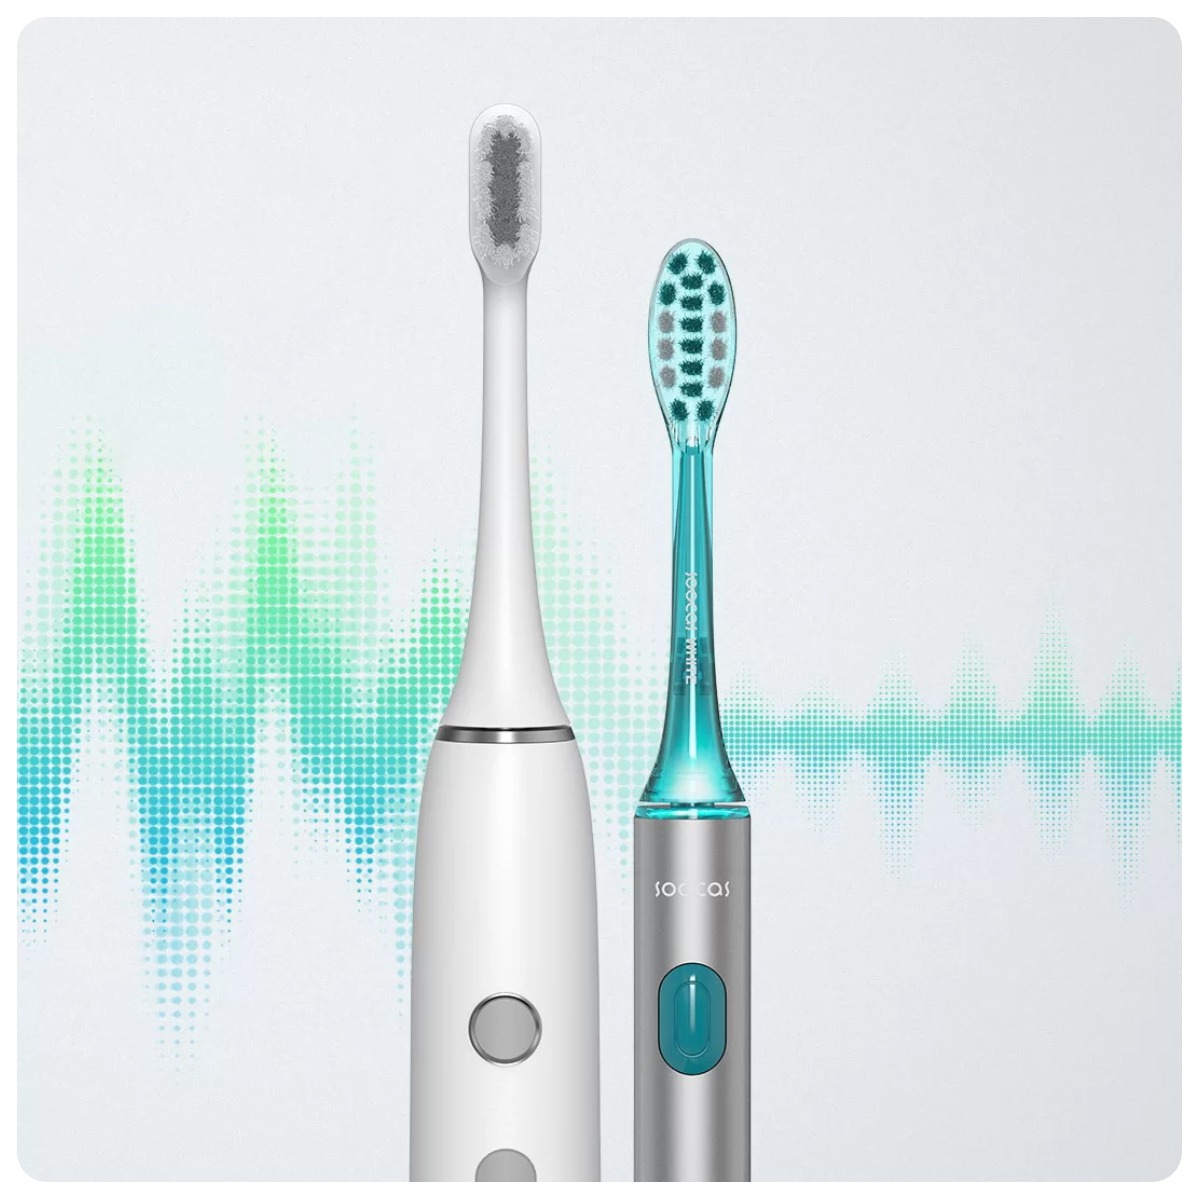 Soocas-Spark-Sonic-Electric-Toothbrush-MT1-05